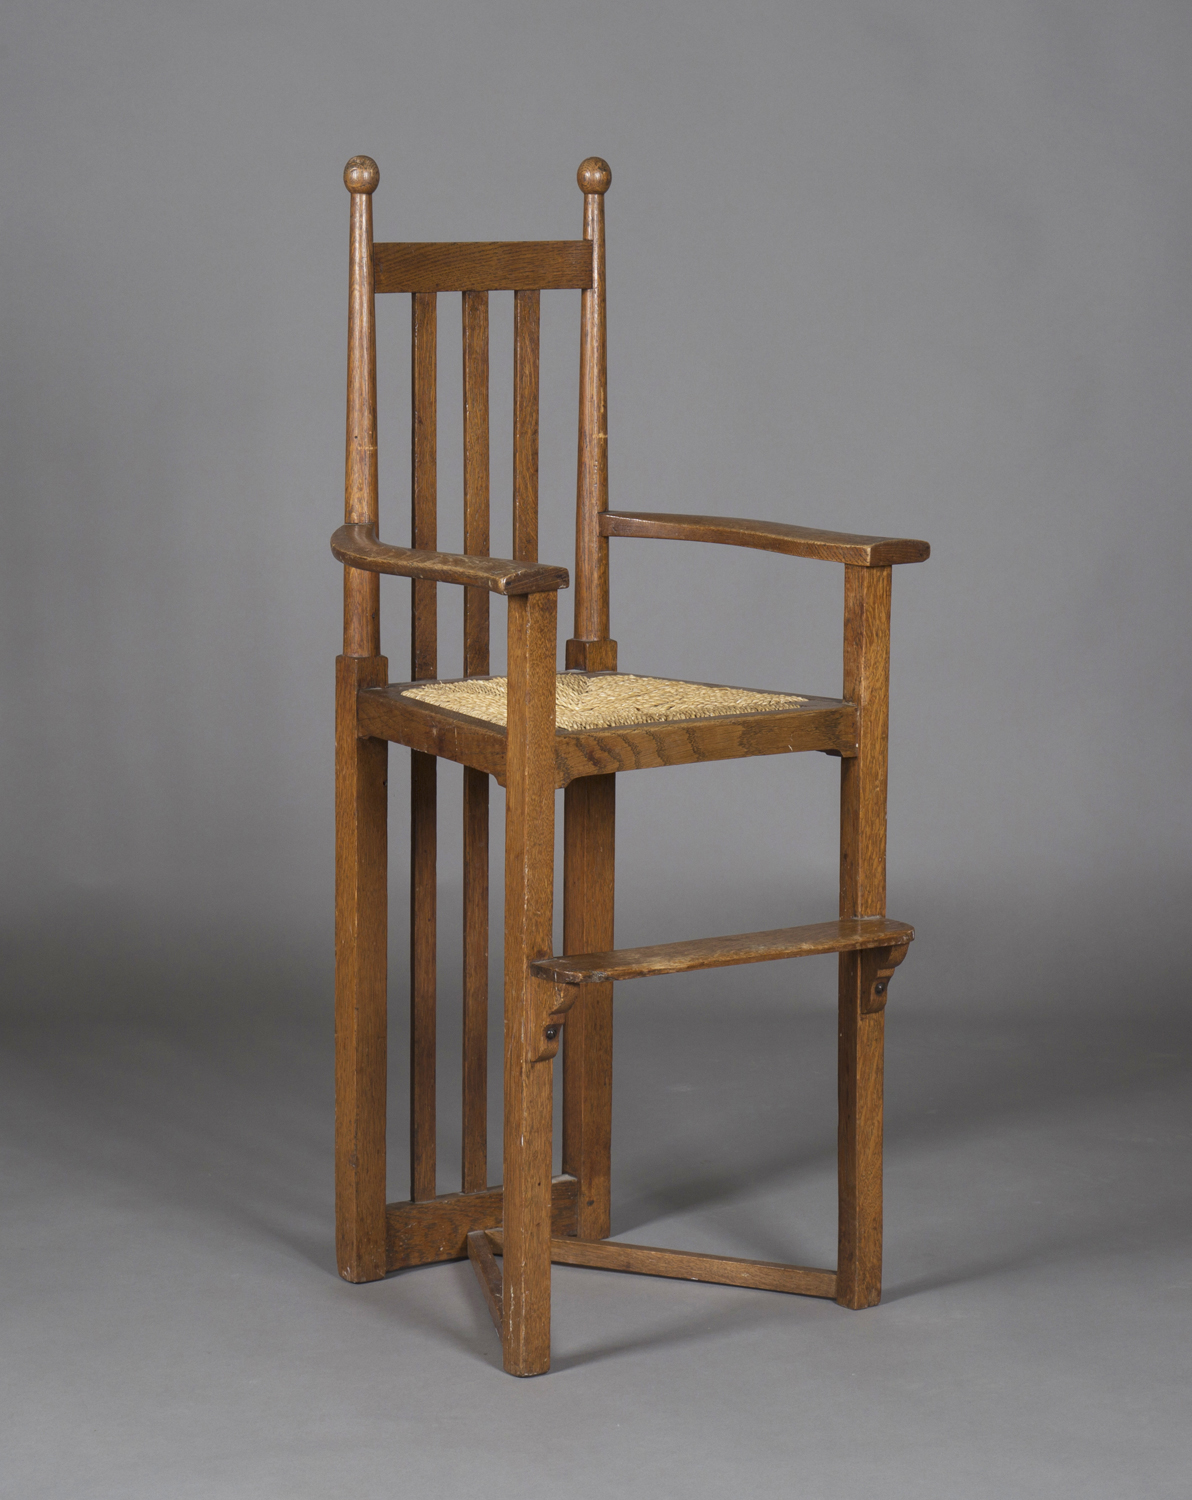 A late 19th/early 20th century Arts and Crafts oak framed child's high chair, in the manner of - Image 2 of 3